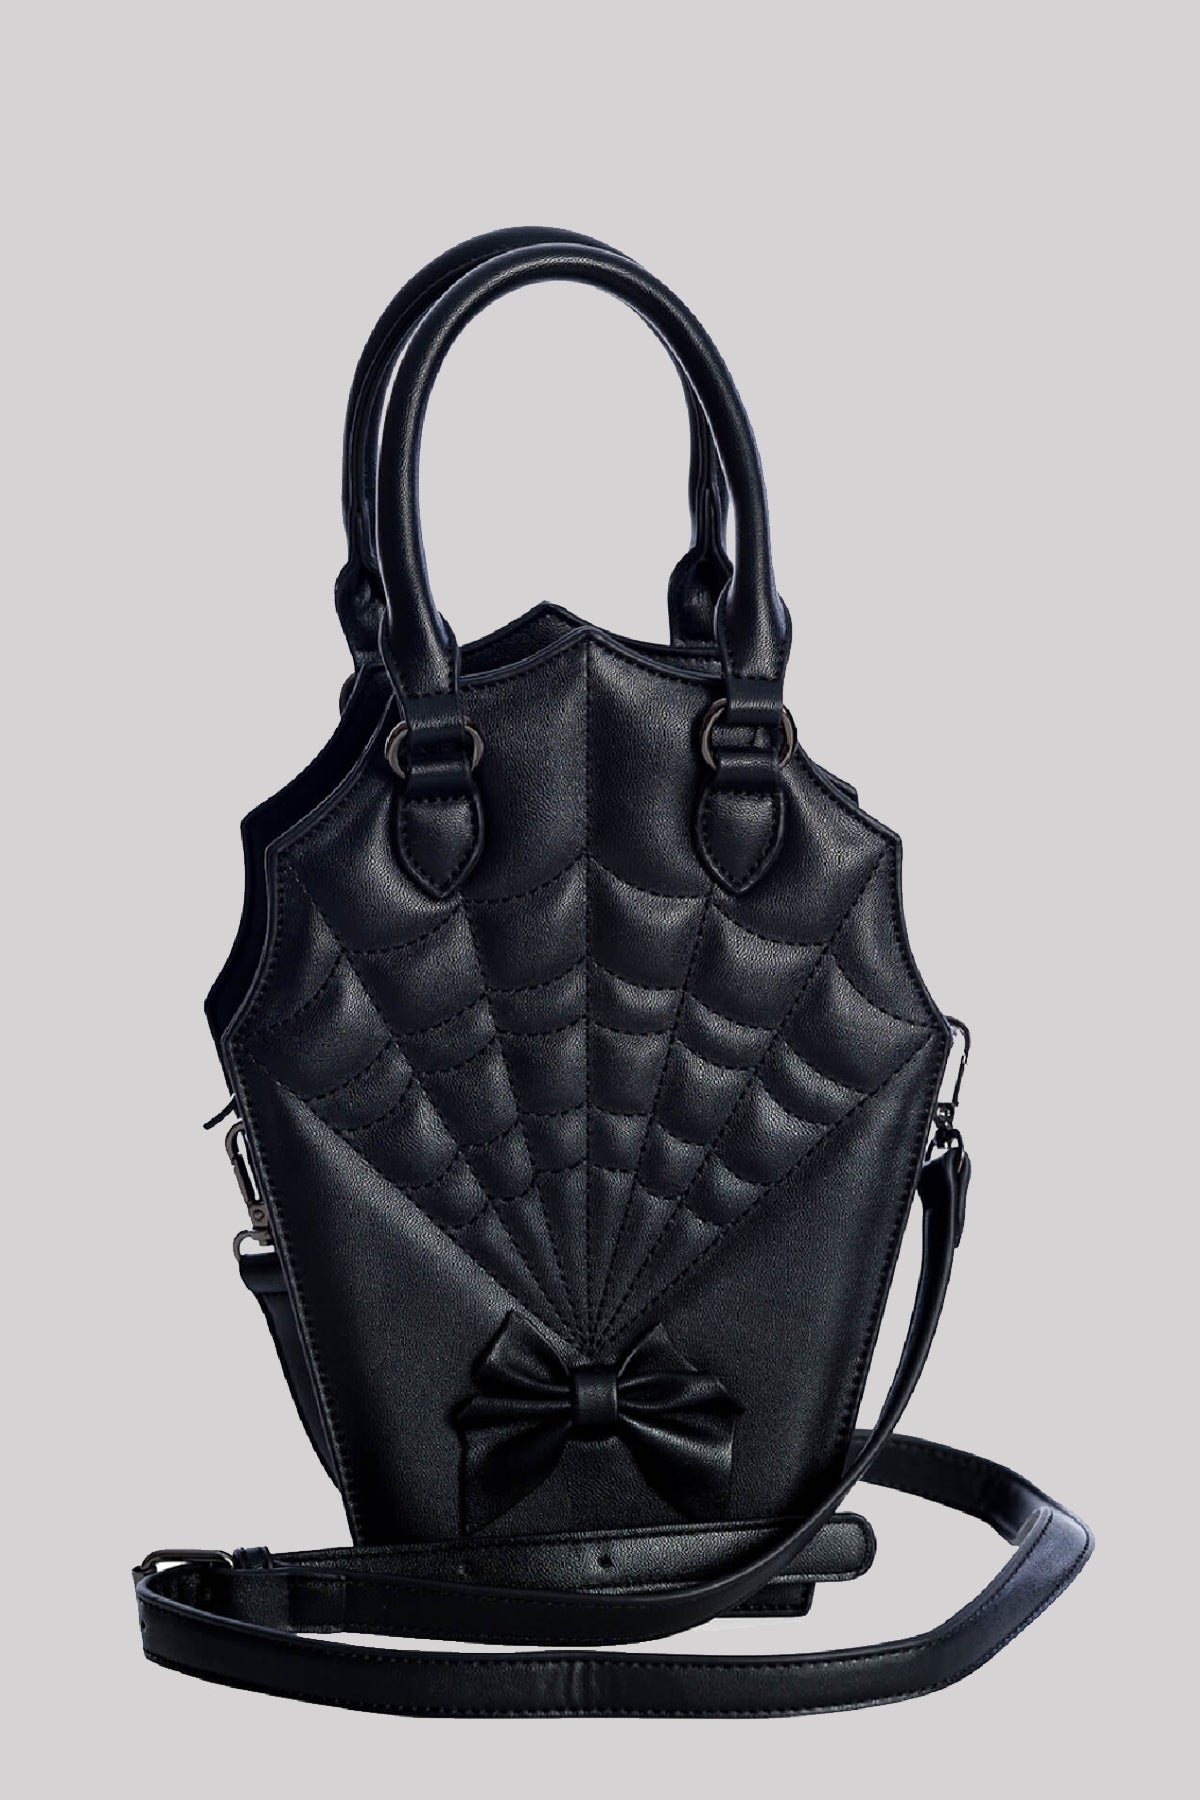 Banned Bow Gothic Spiderweb Ghoul Bag